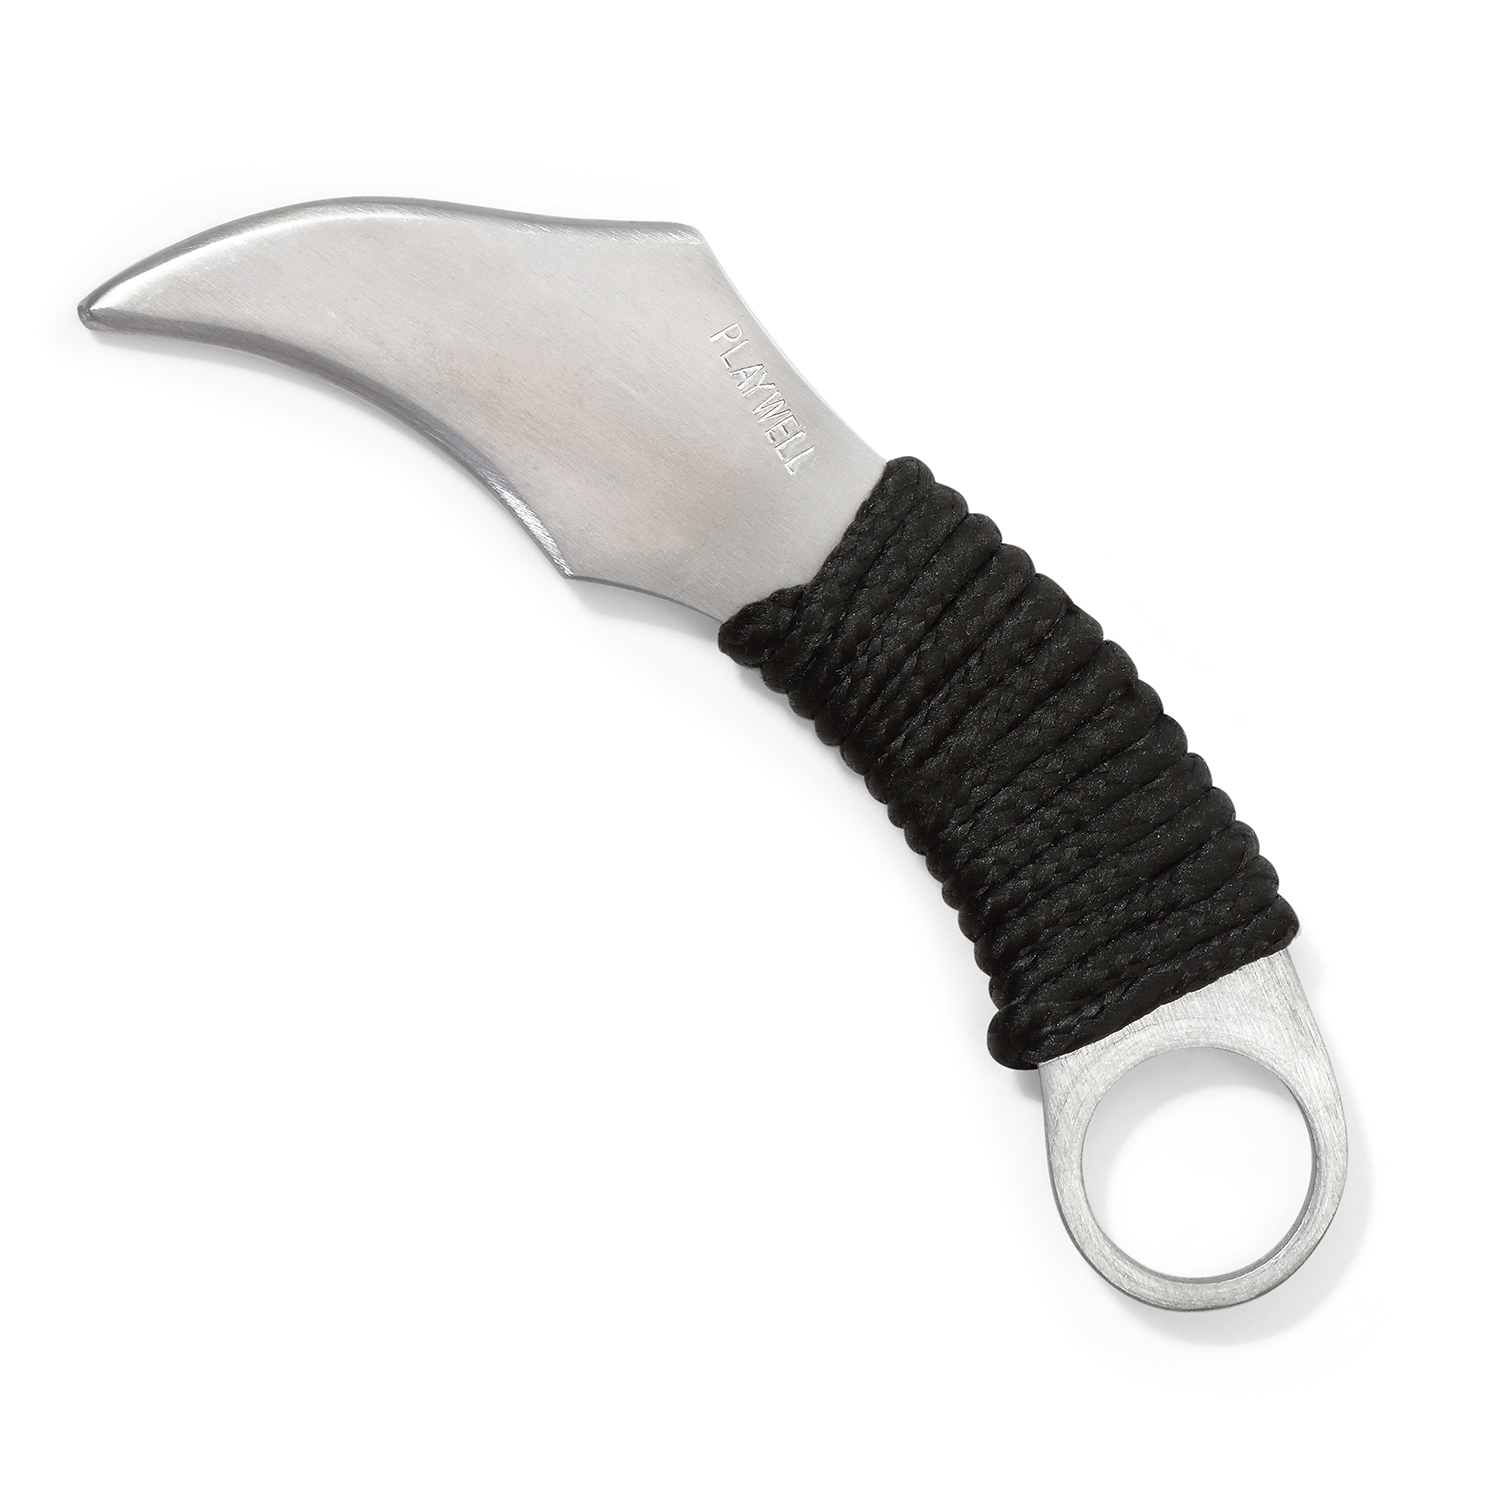 Deluxe Metal Roped Grip Blunt Karambit Trainer - Click Image to Close